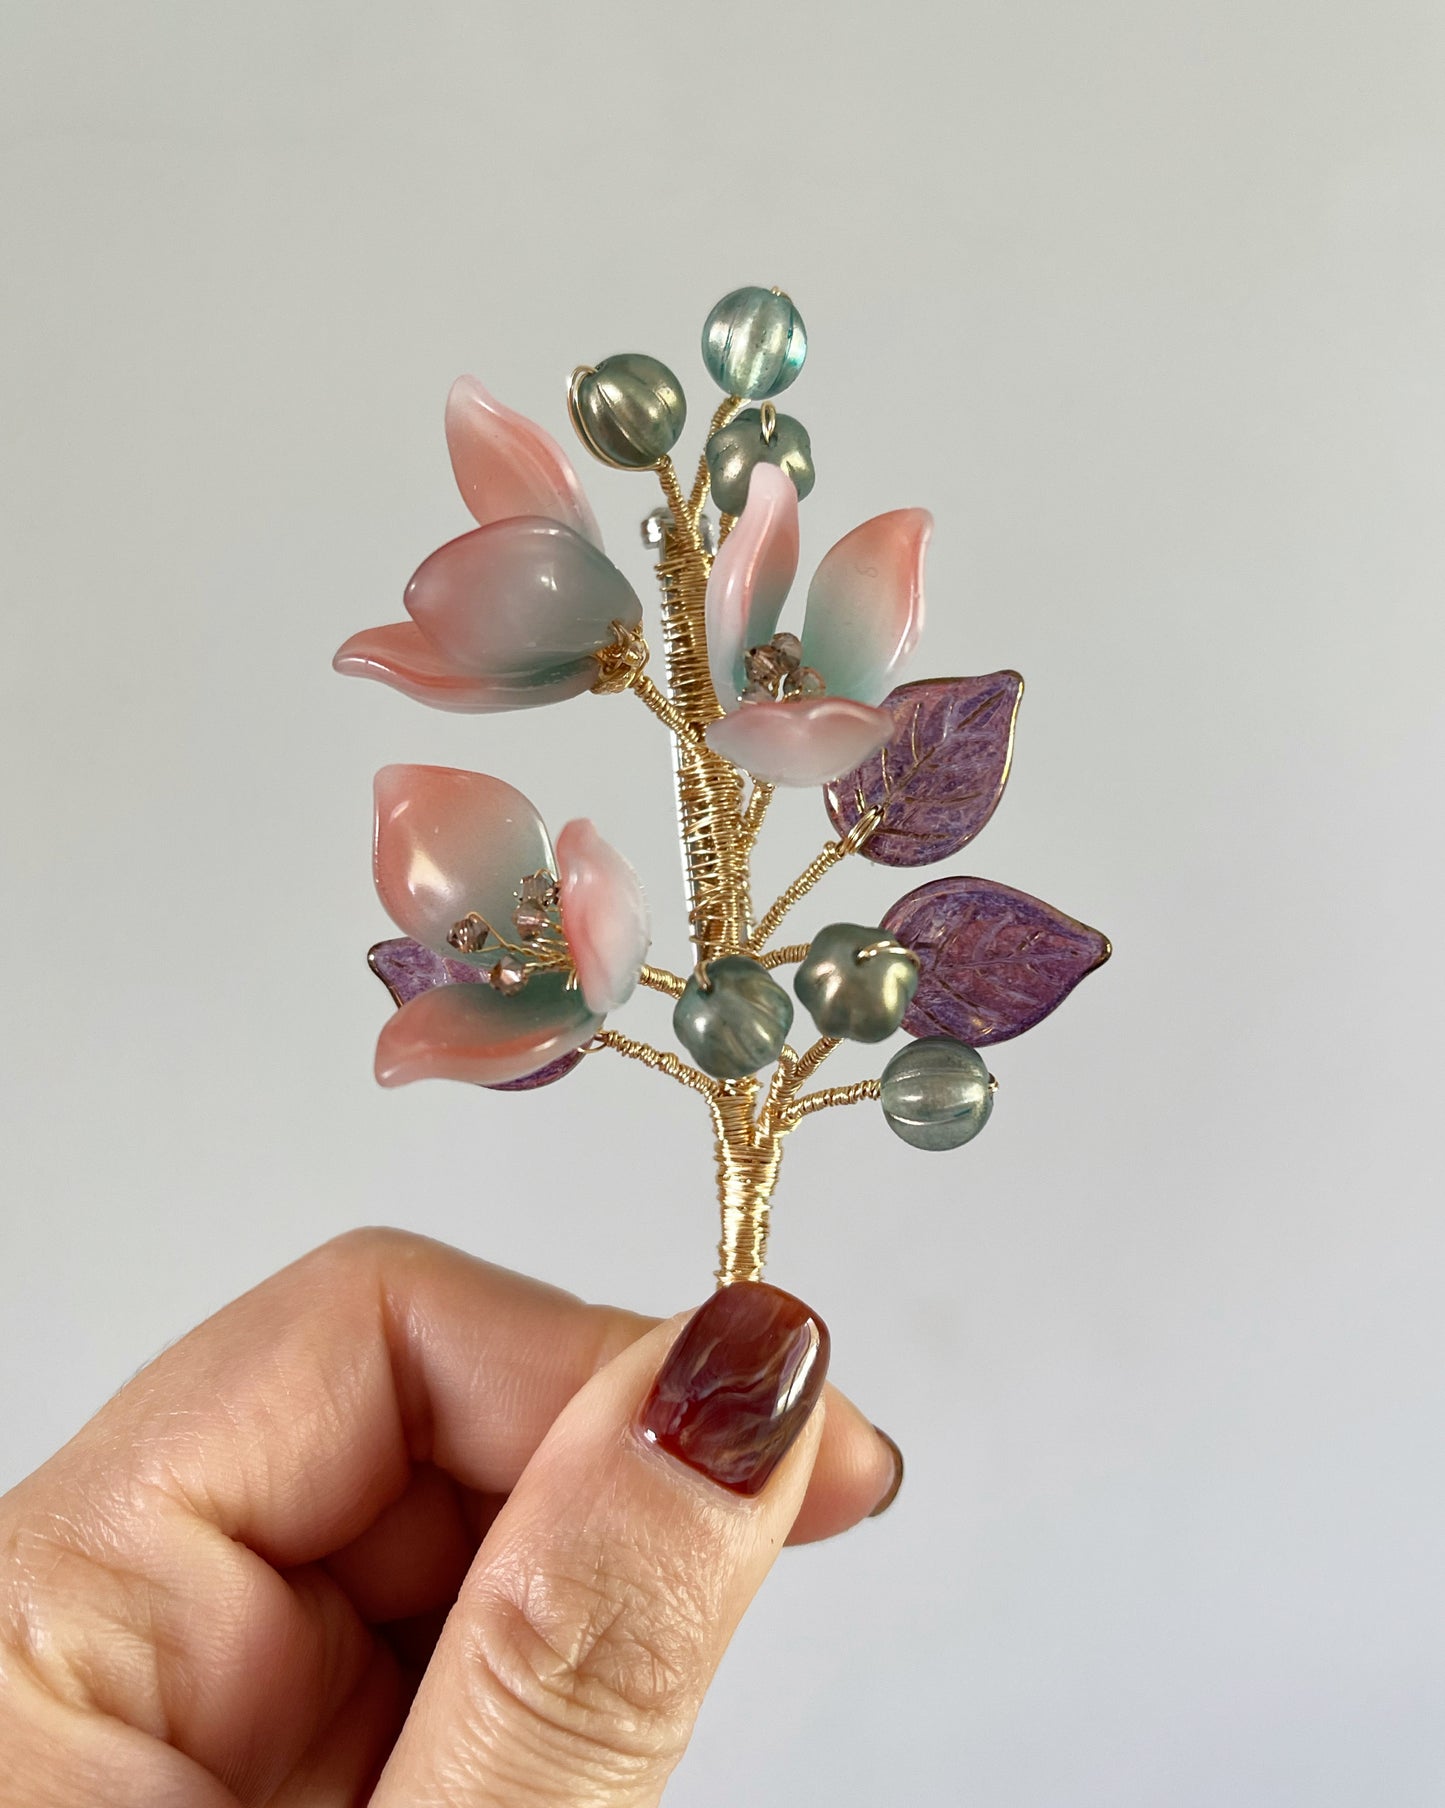 Autumn sonata in lily buds and green berries brooch